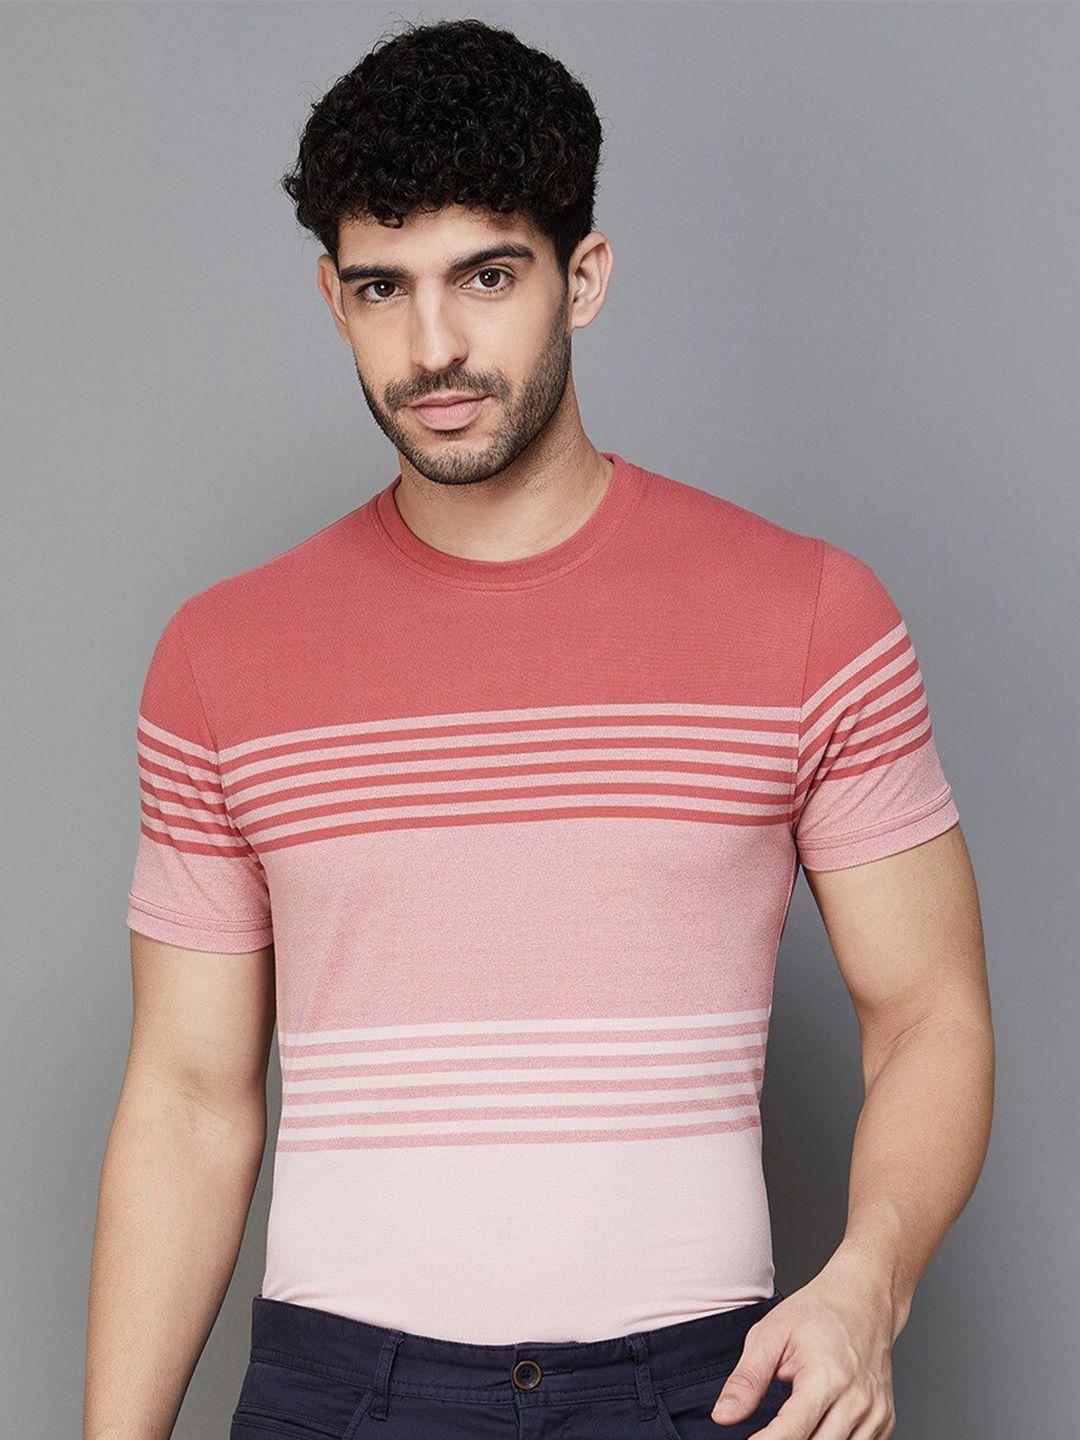 code by lifestyle striped round neck t-shirt